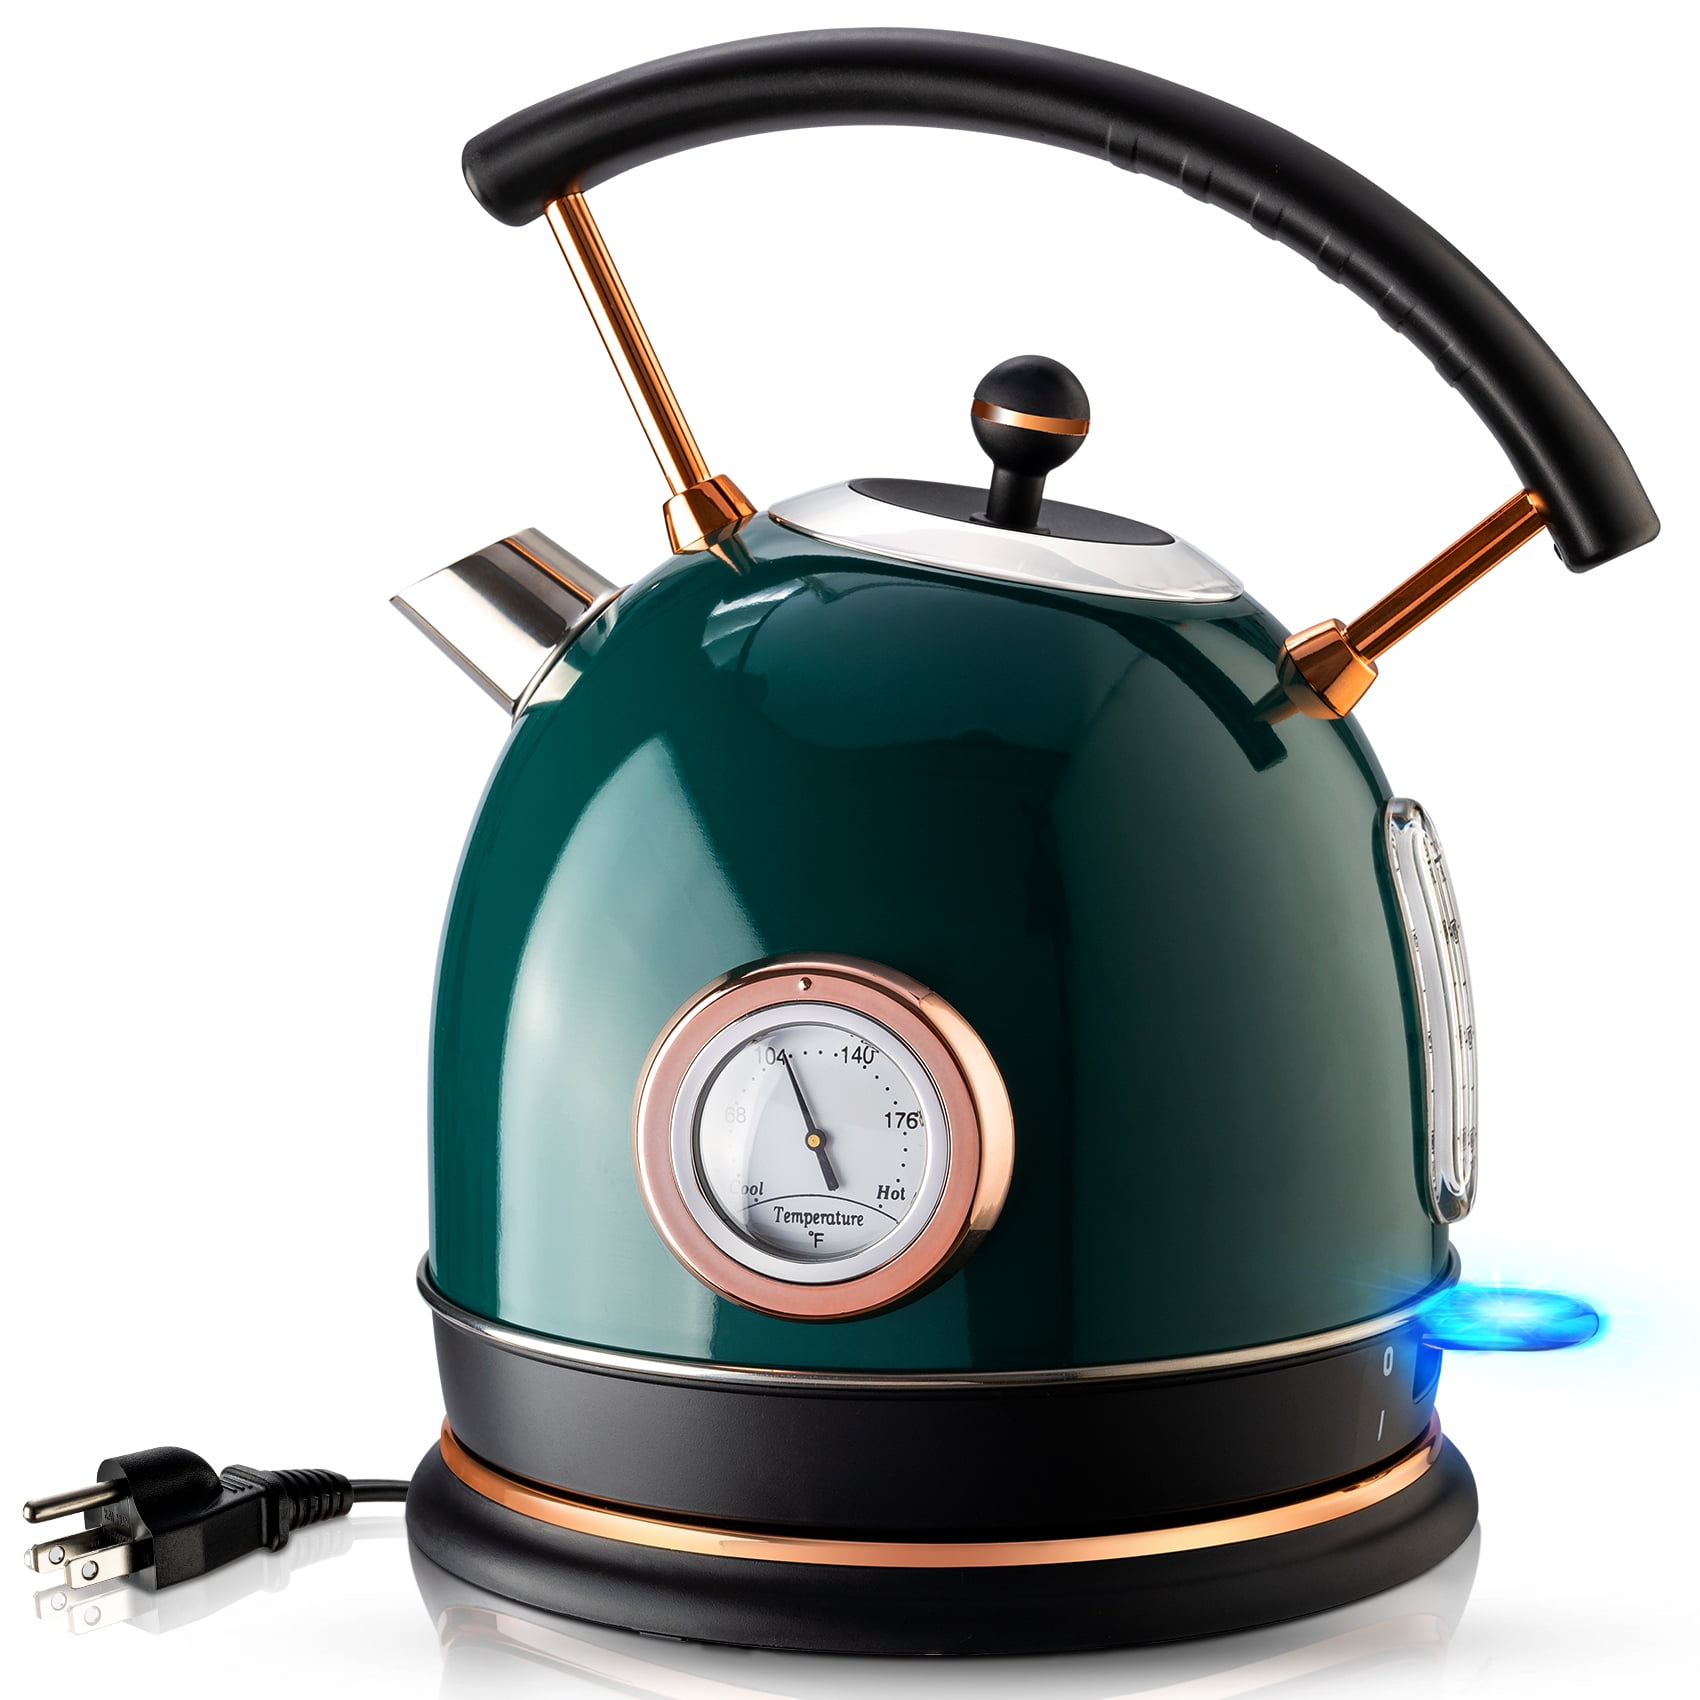 Retro Electric Kettle - 1.7 Liters / 57.5 Ounces Tea Kettle with